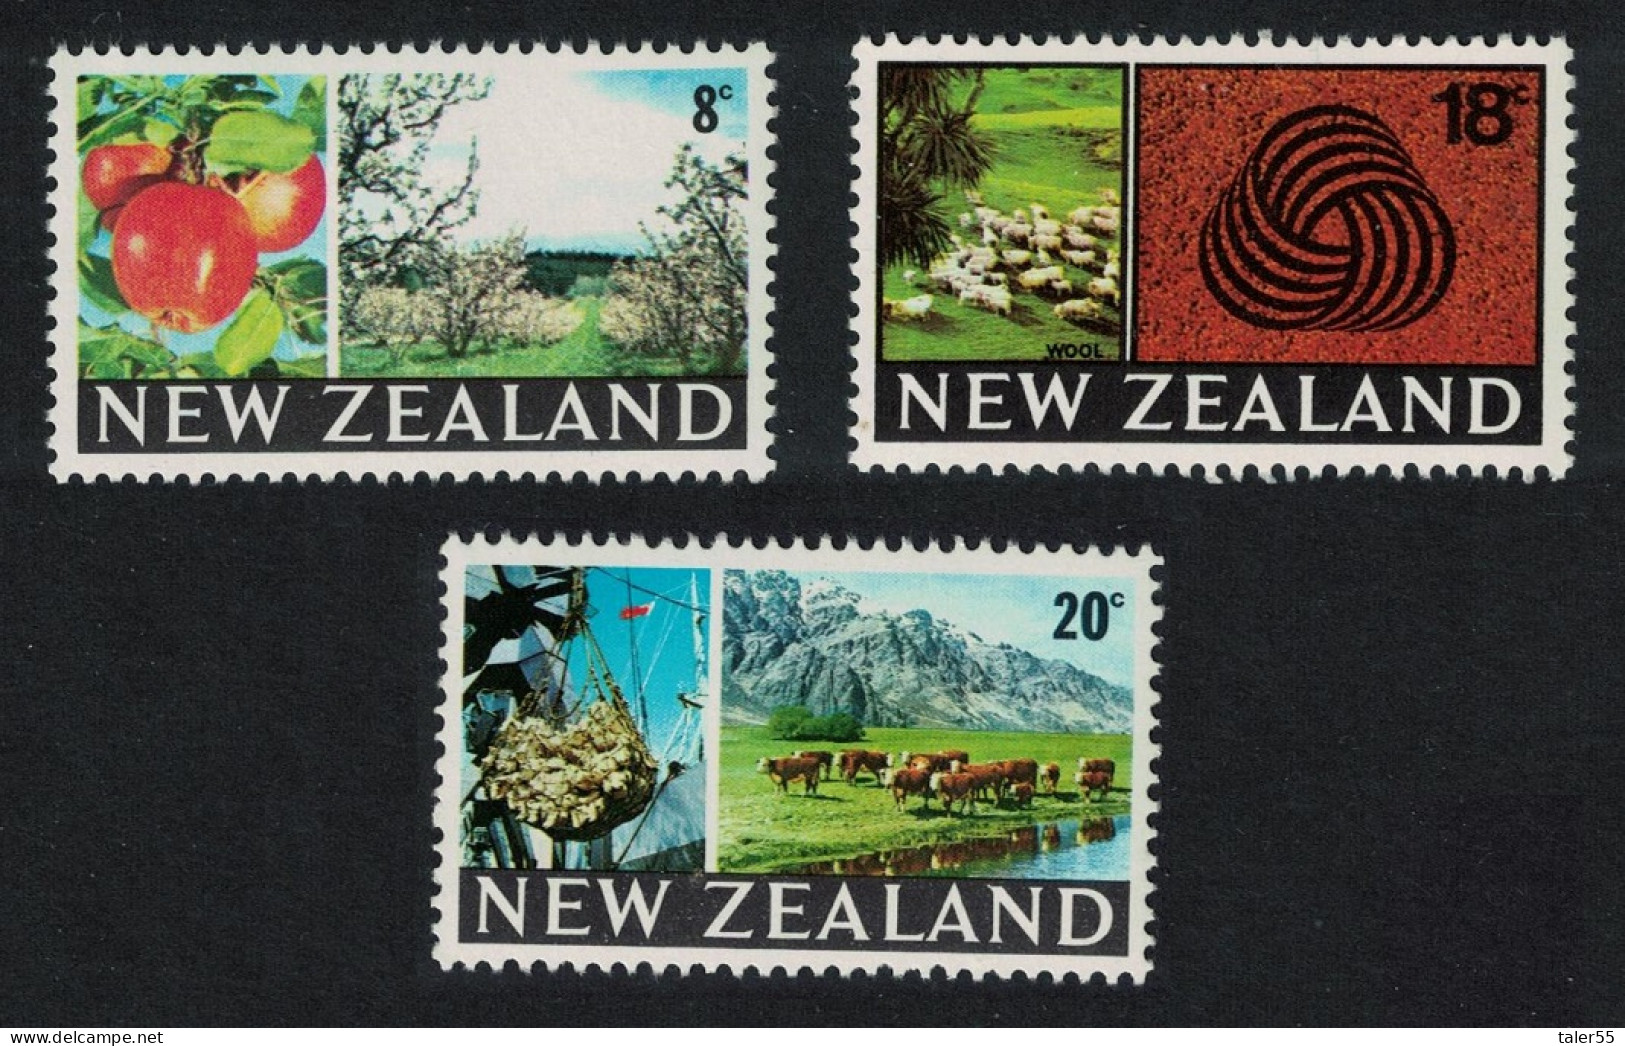 New Zealand Sheep Cattle Apple Orchard 3v 1969 MNH SG#872-876 MI#493-495 Sc#416-419 - Unused Stamps